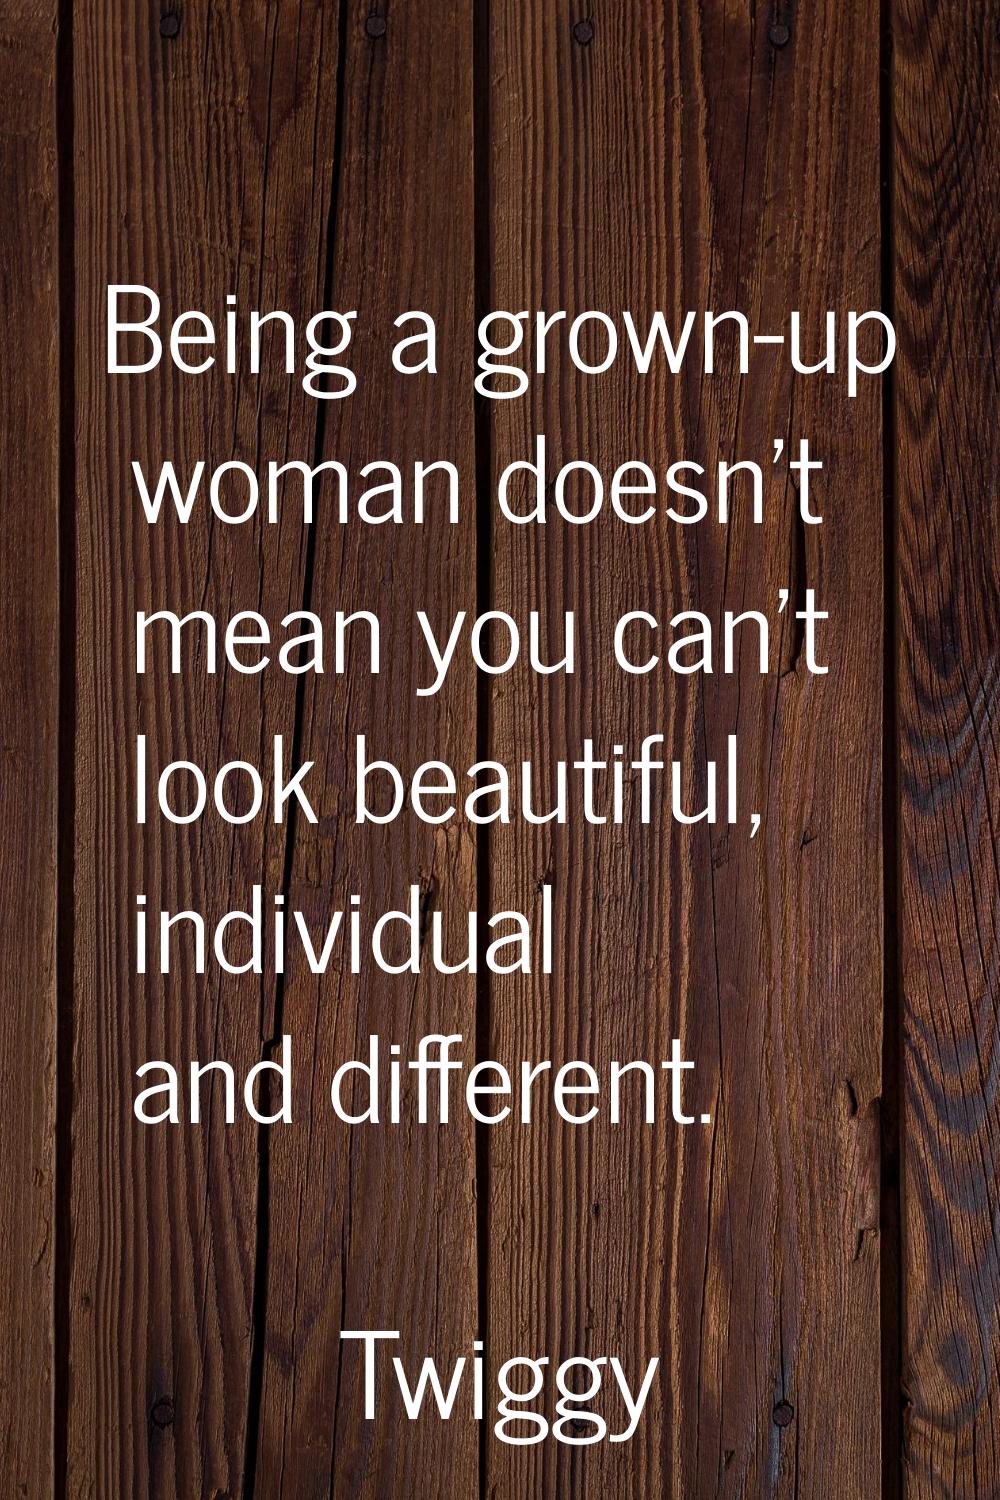 Being a grown-up woman doesn't mean you can't look beautiful, individual and different.